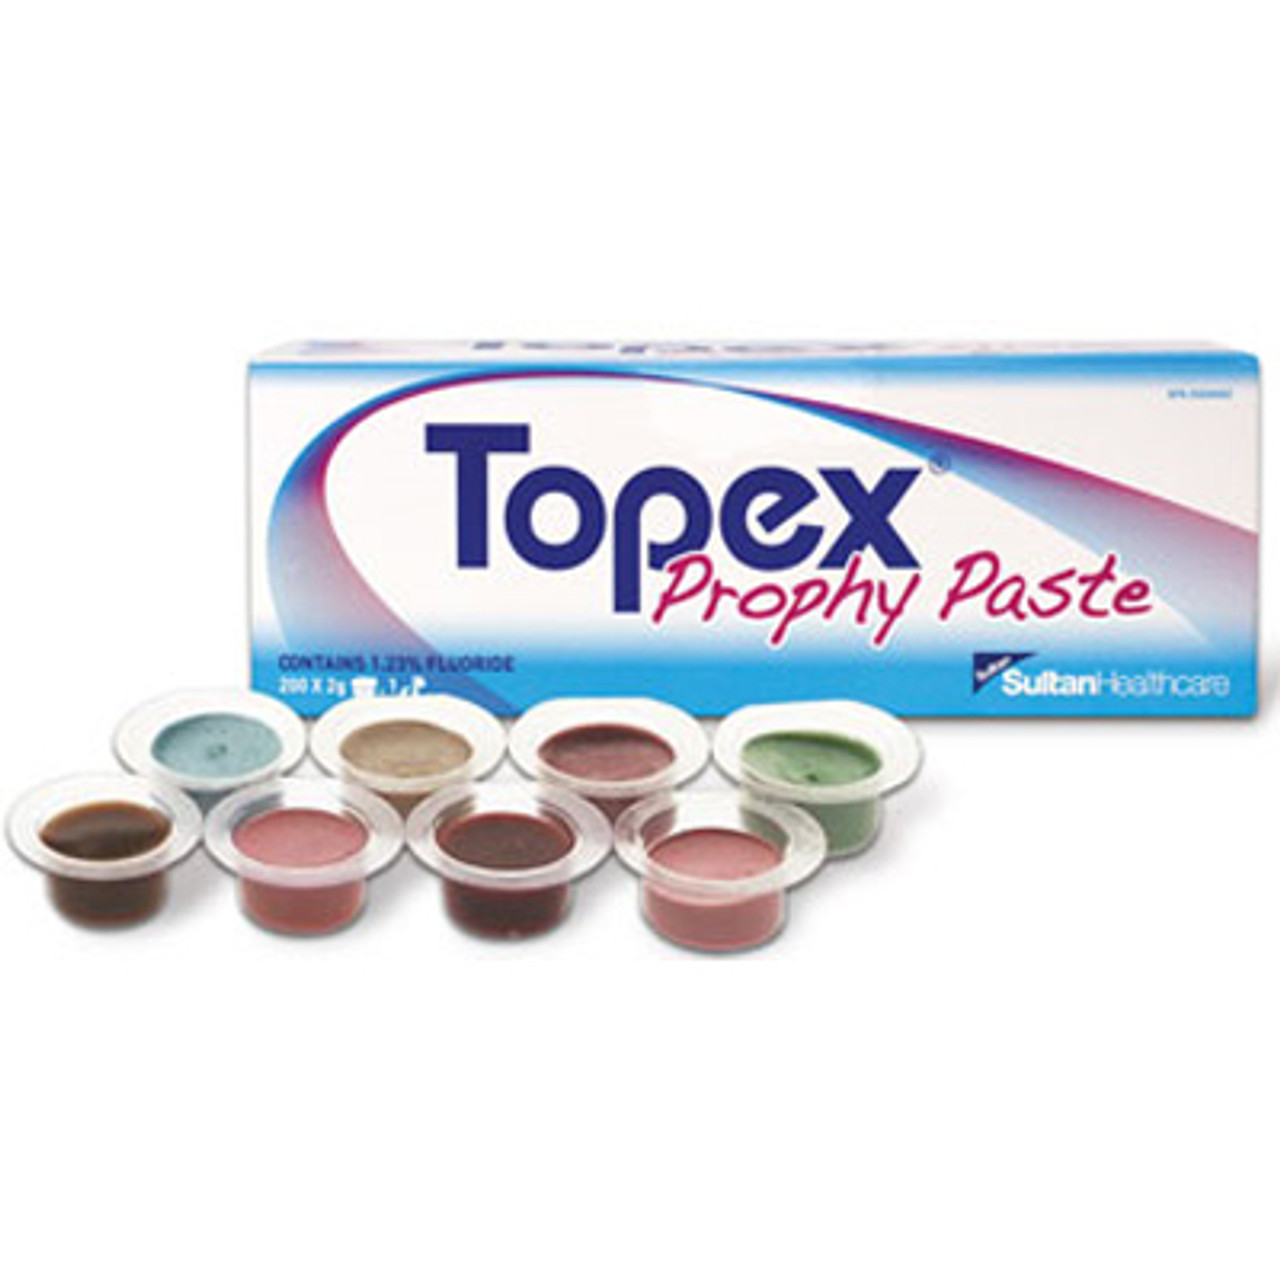 Sultan Topex Prophylaxis Paste Cups Mint, X-Coarse, 200 cups/bx